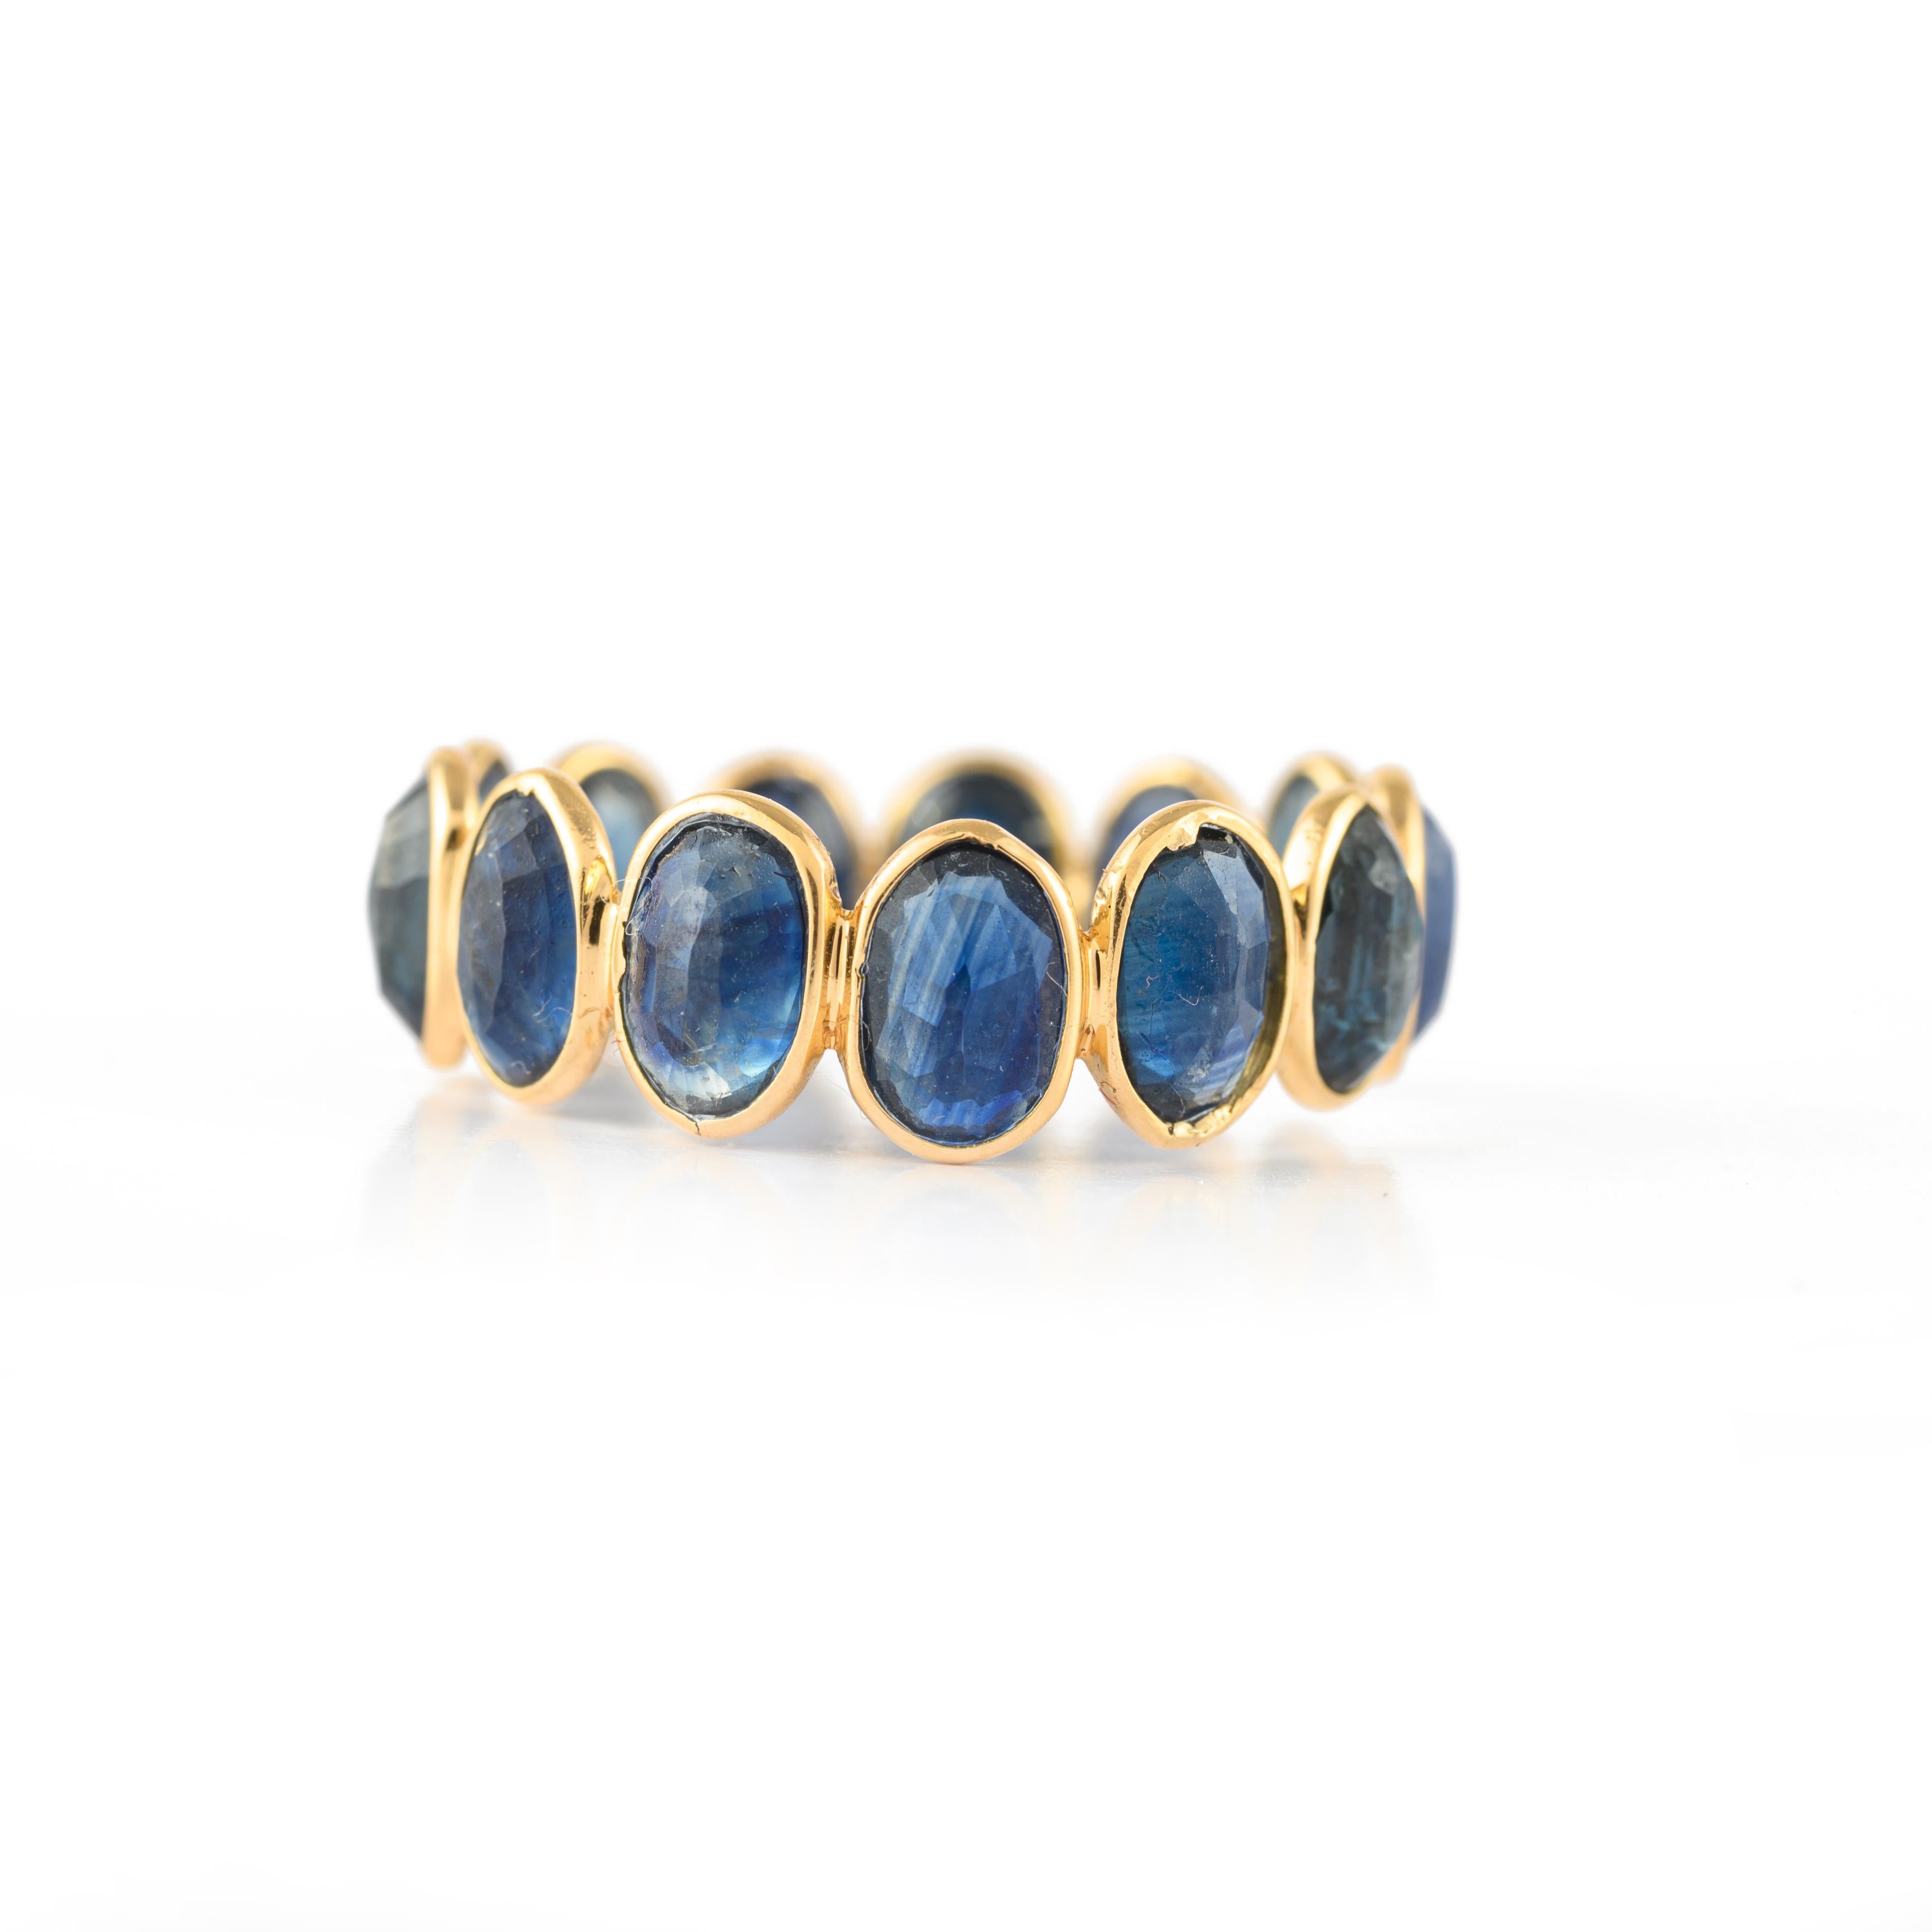 For Sale:  7.8 Carat Continual Oval Blue Sapphire Eternity Band Ring in 18k Yellow Gold 7